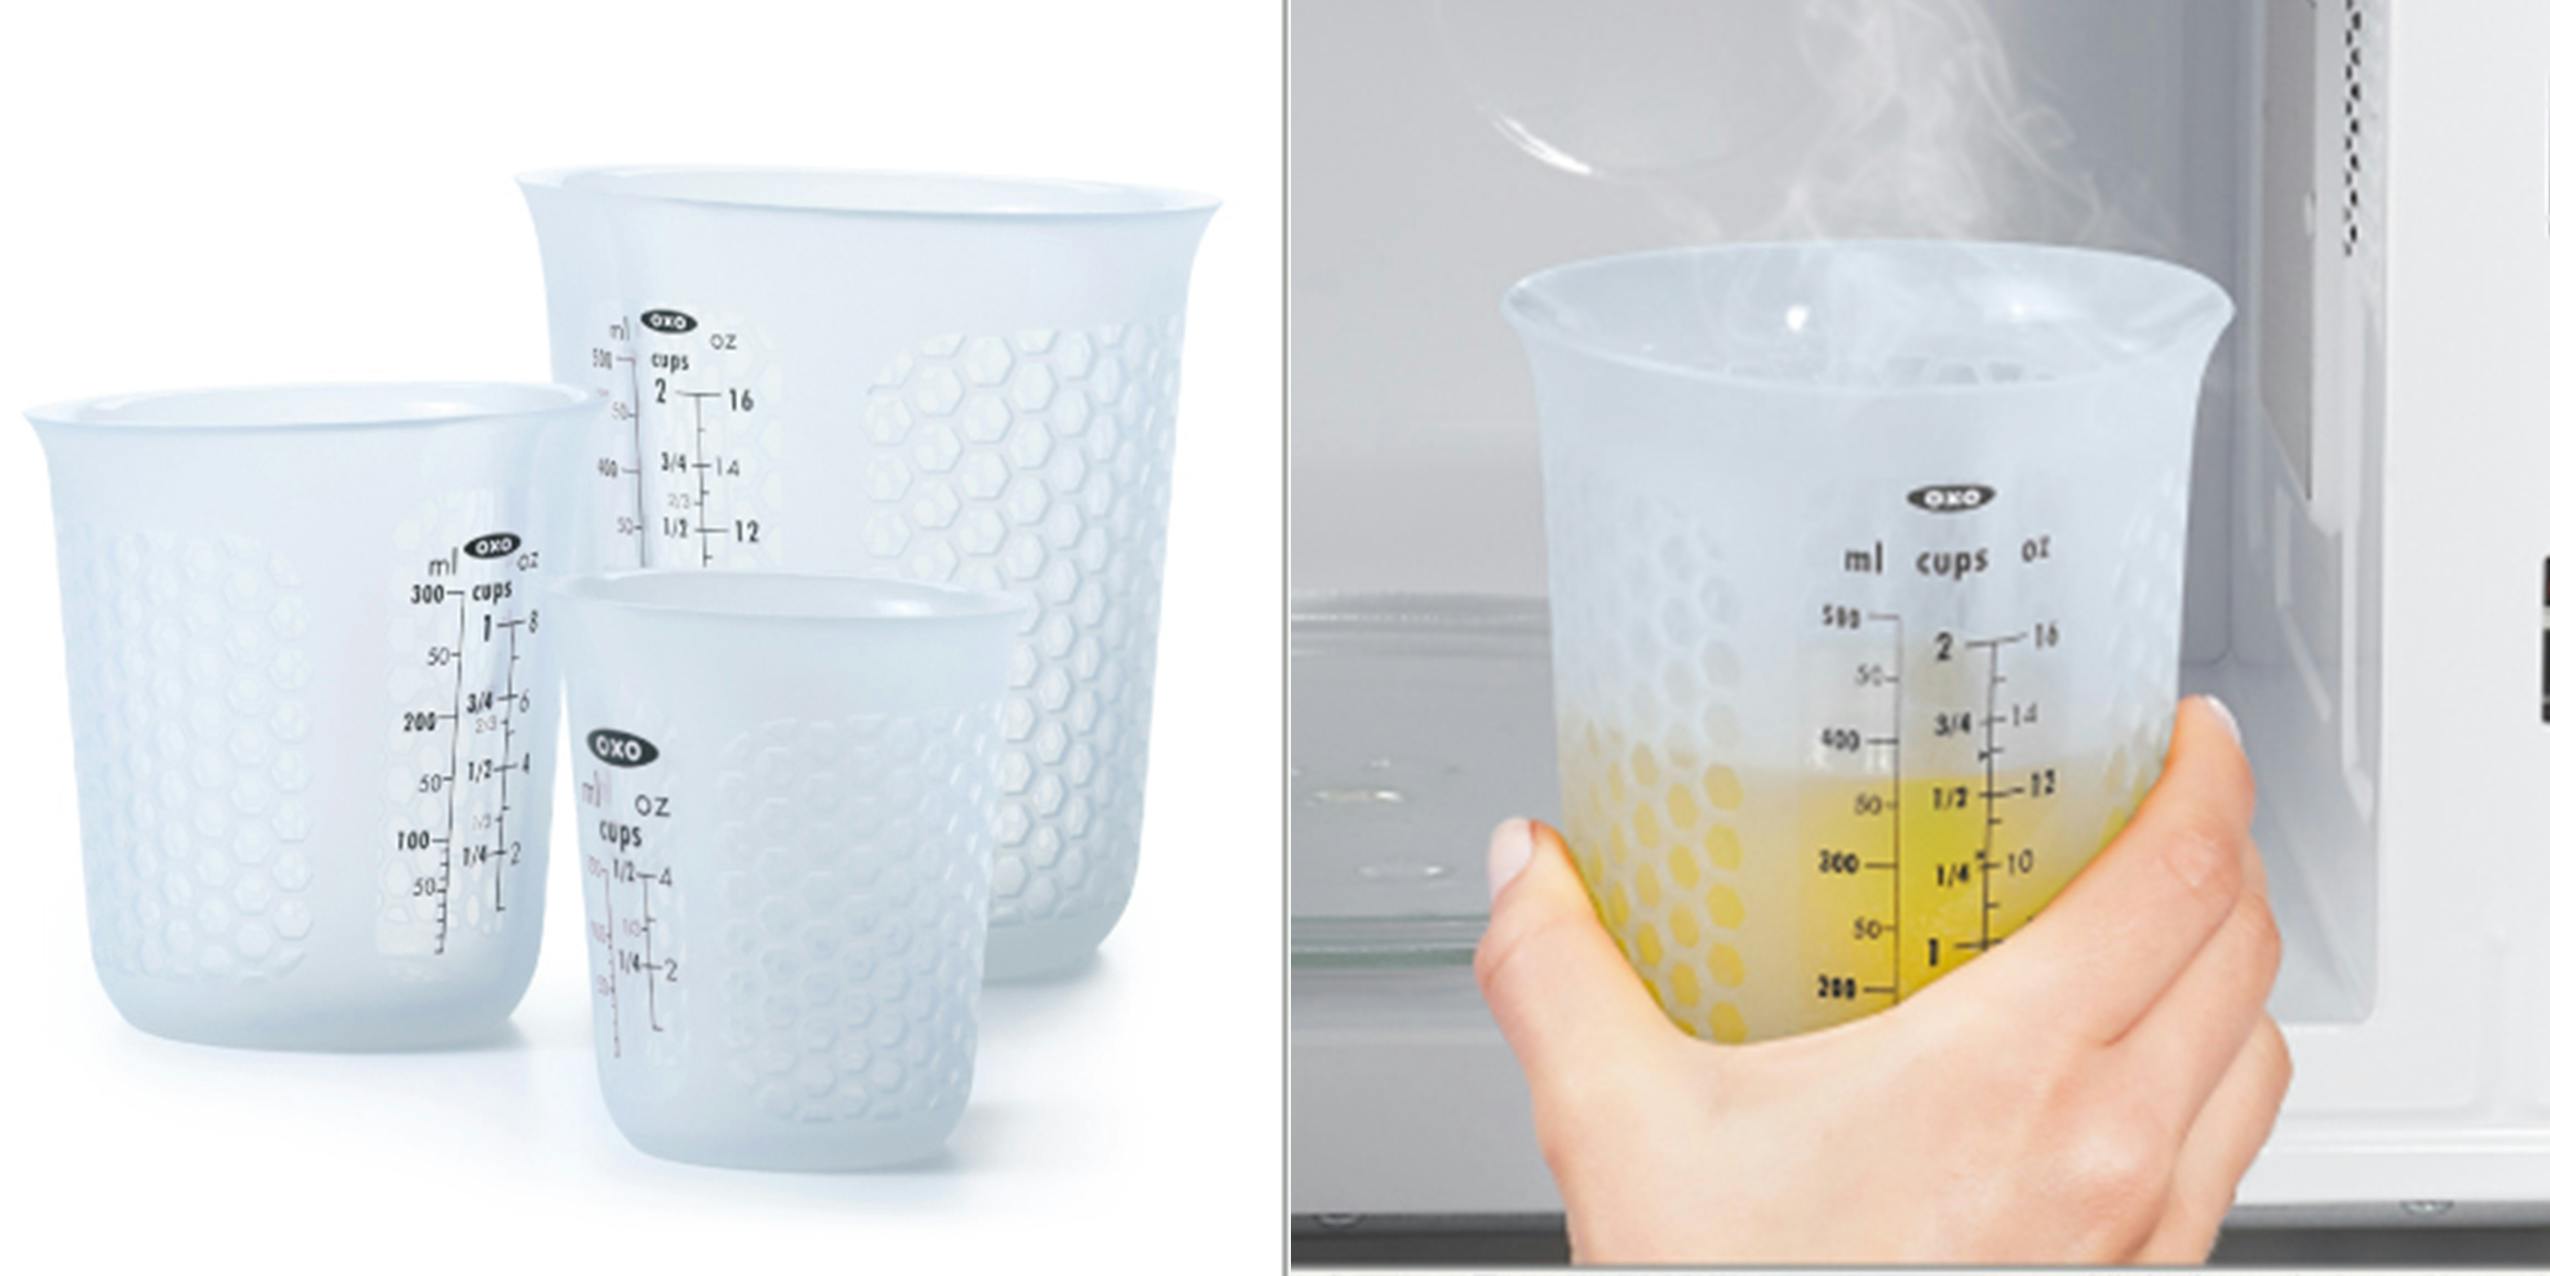 OXO Silicone Measuring cups on display along with their use in a microwave.